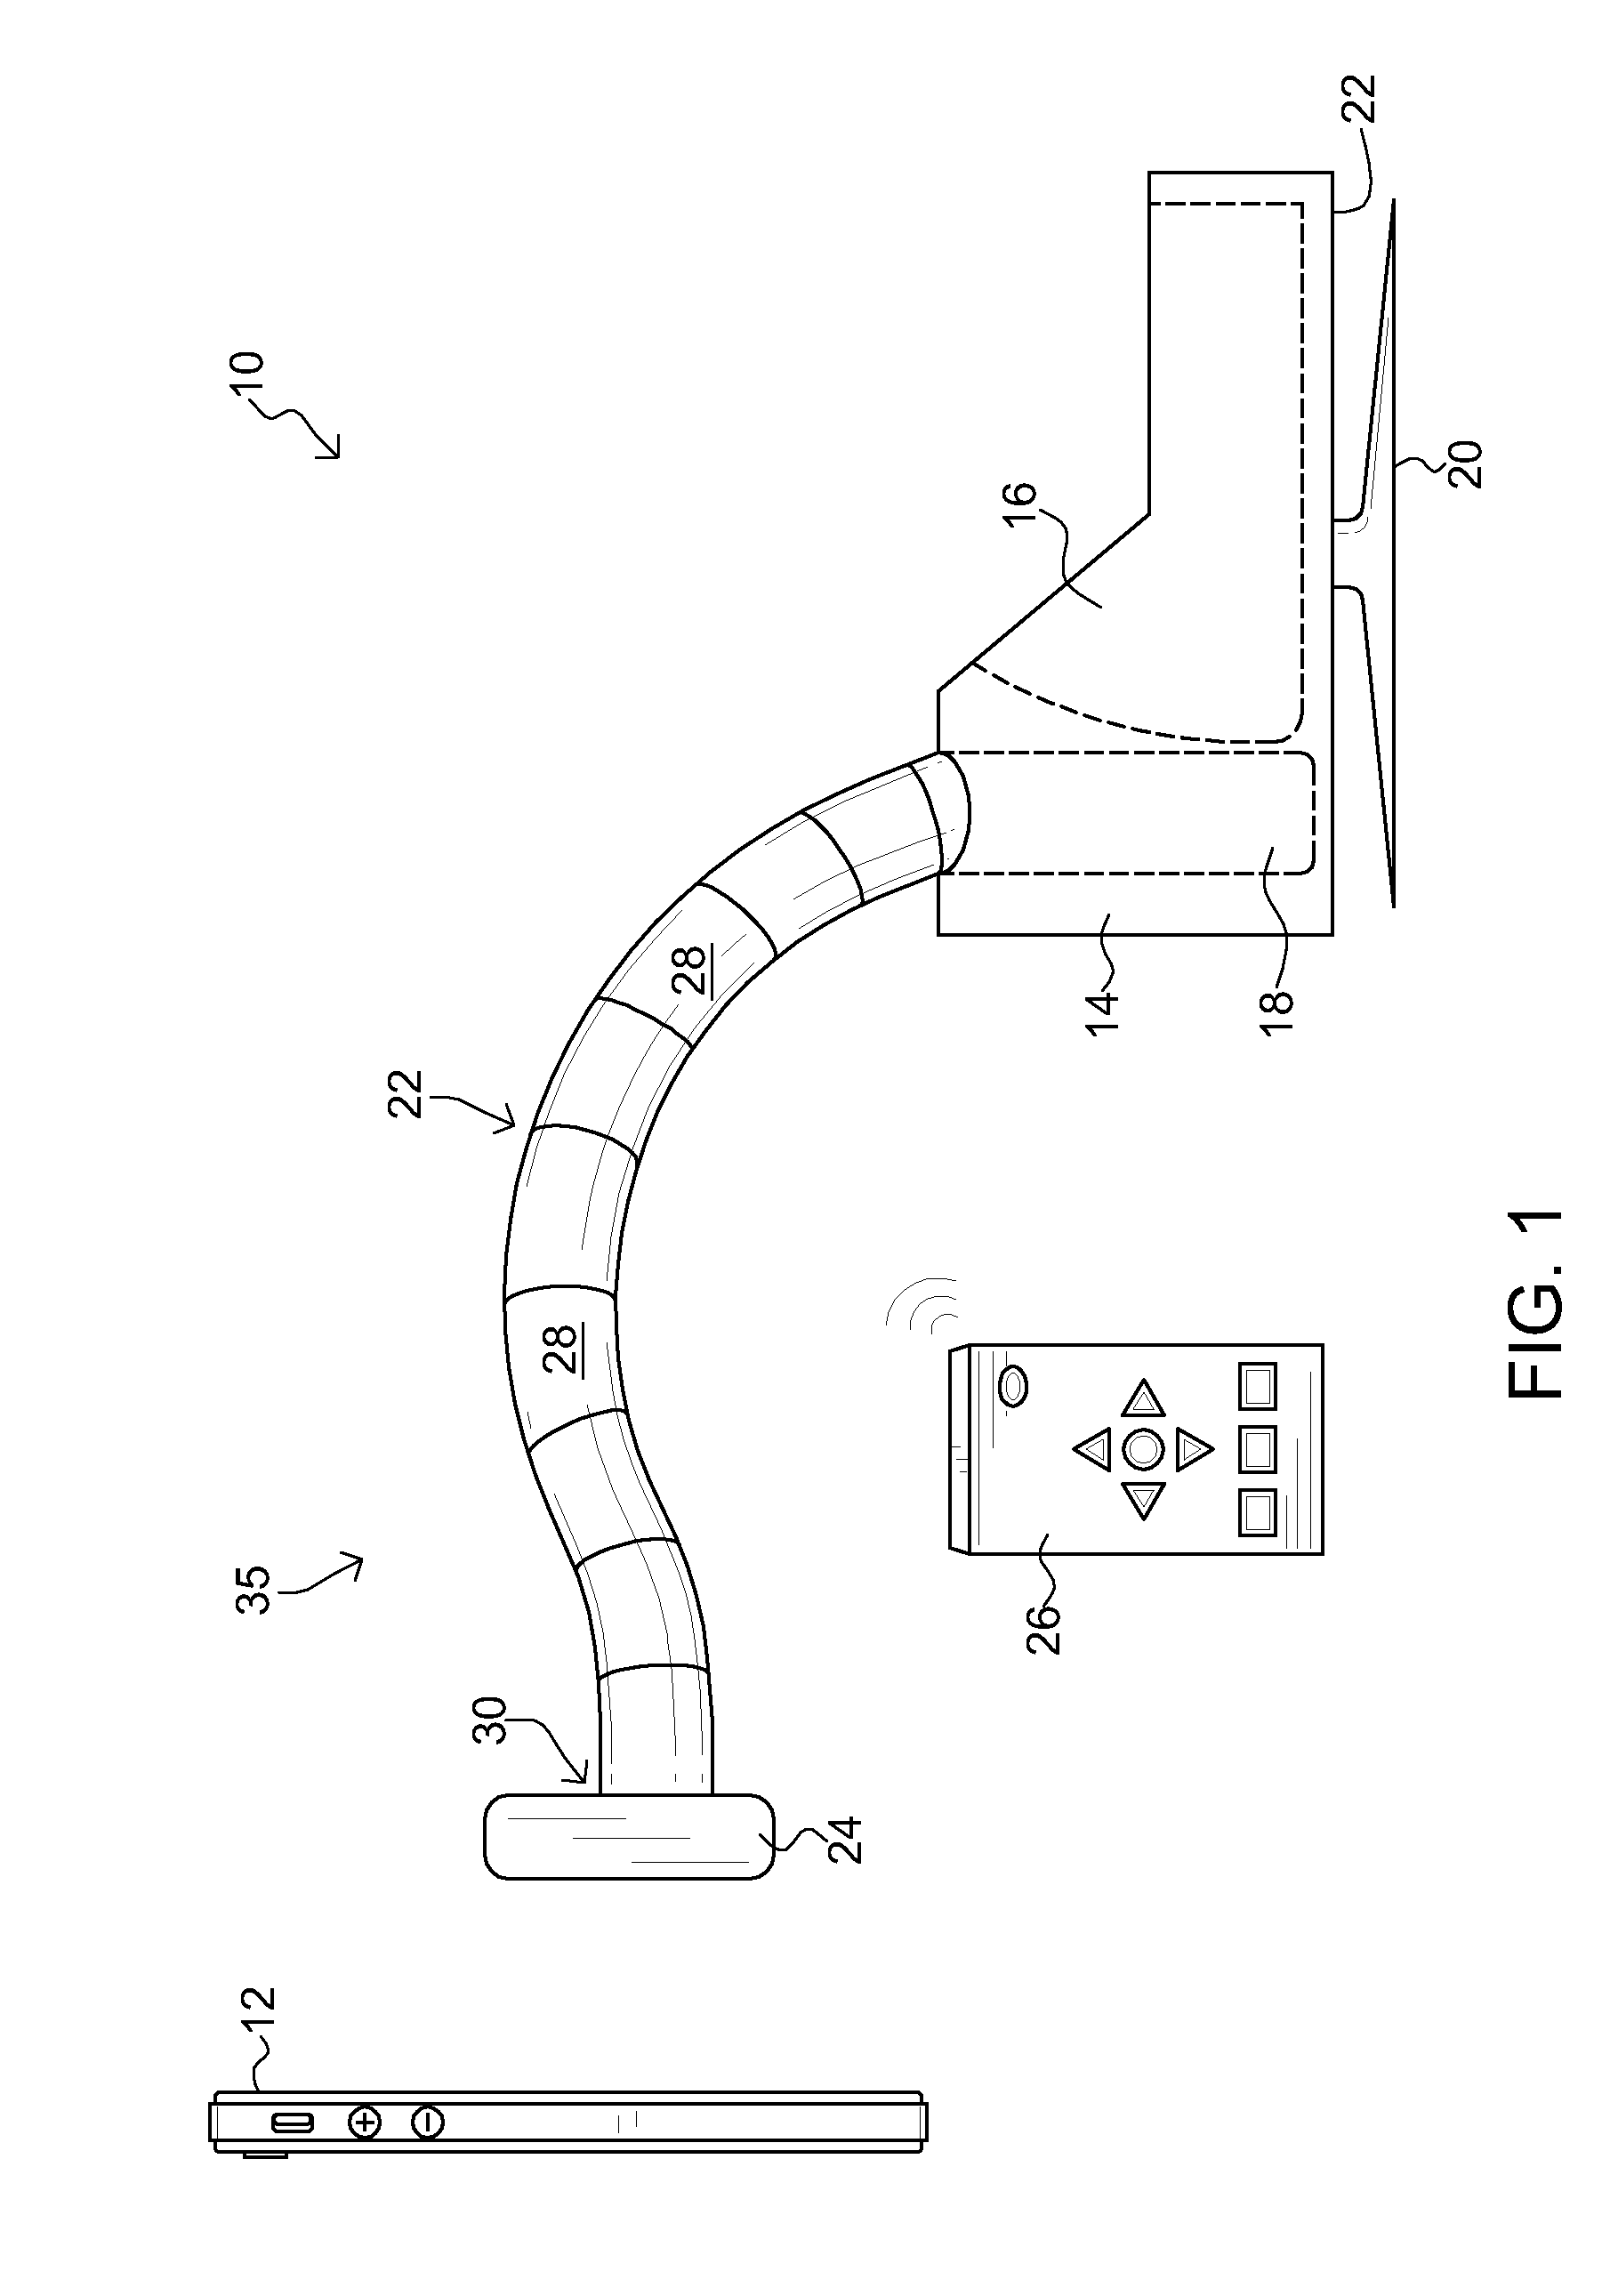 Apparatus for holding a portable electronic device